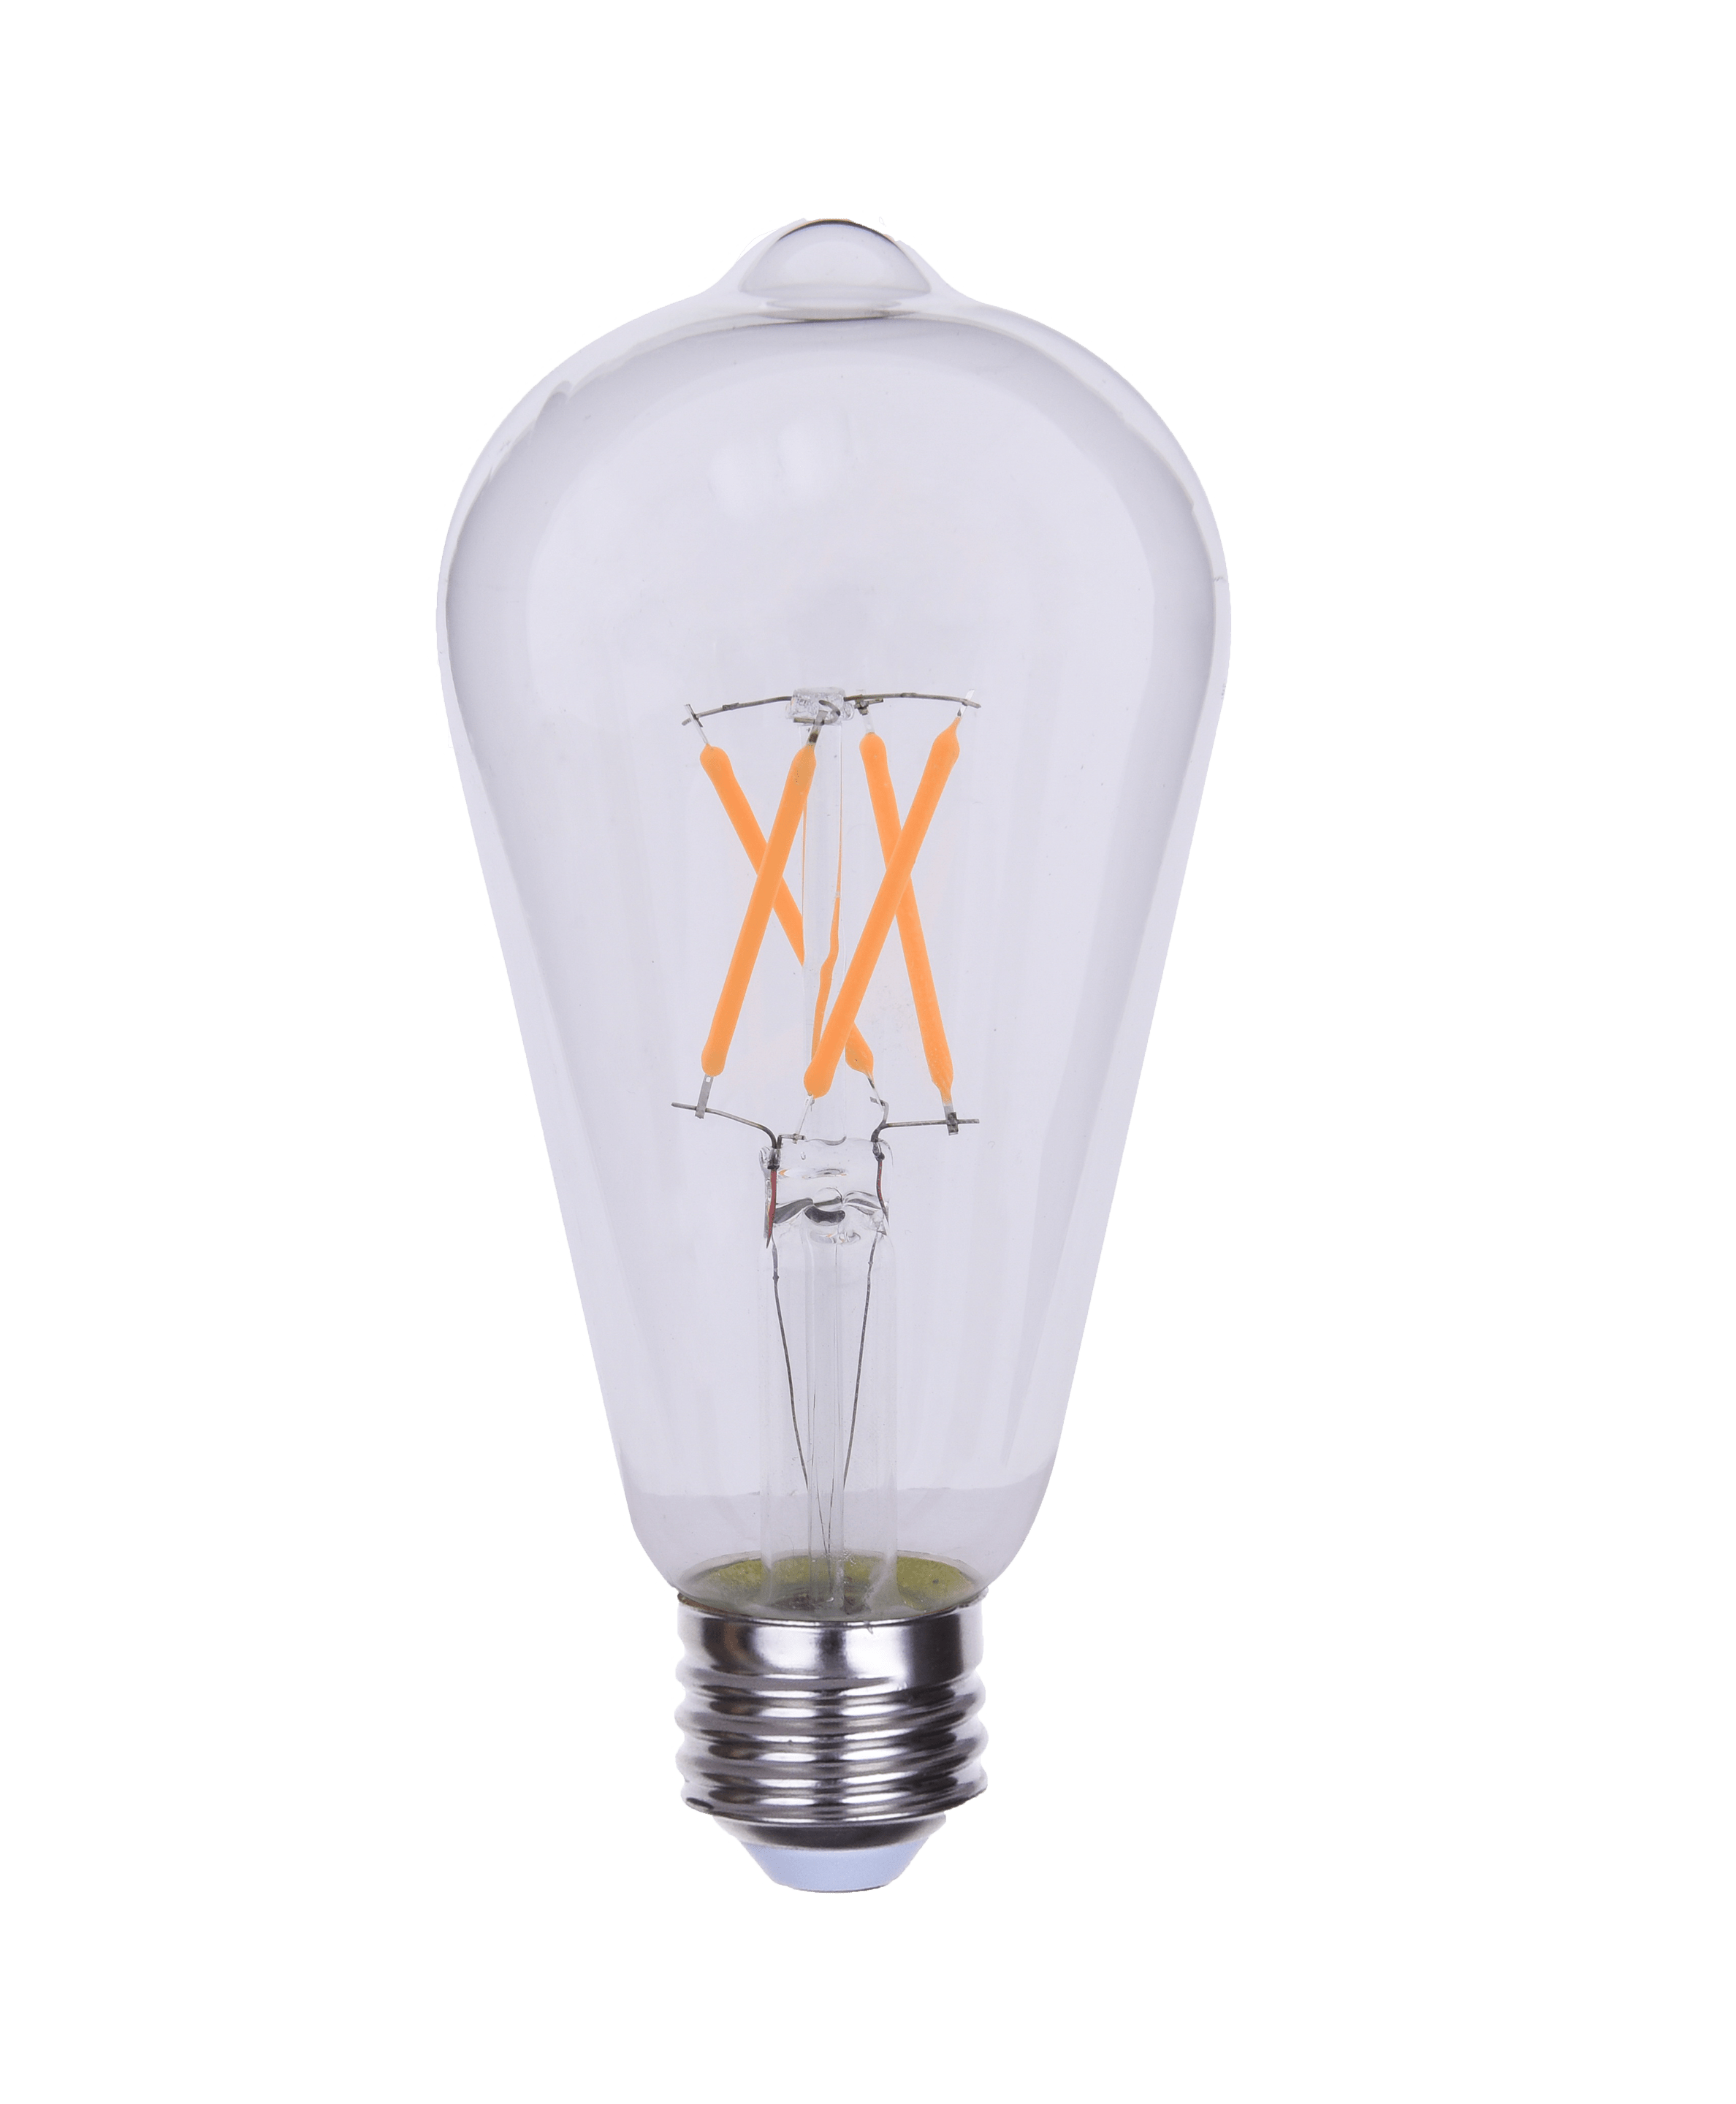 Surgery Obedience Surrey ST21 4W LED Bulb – Goodlite